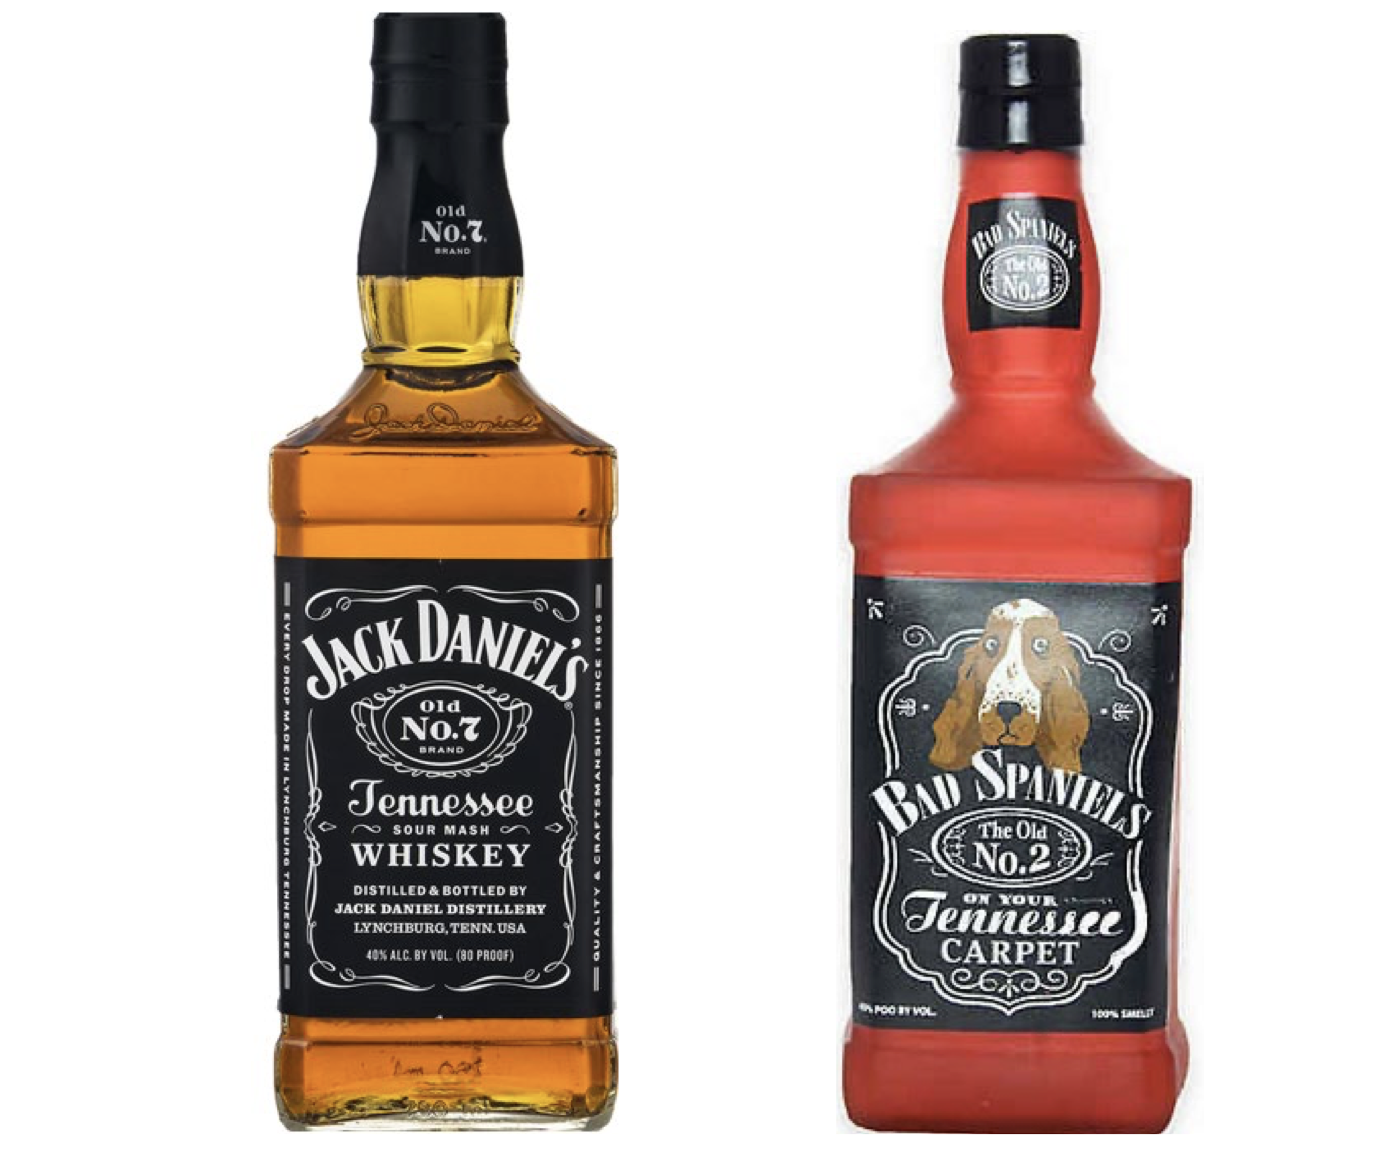 Jack Daniel needs a drink: Whiskey sales are falling